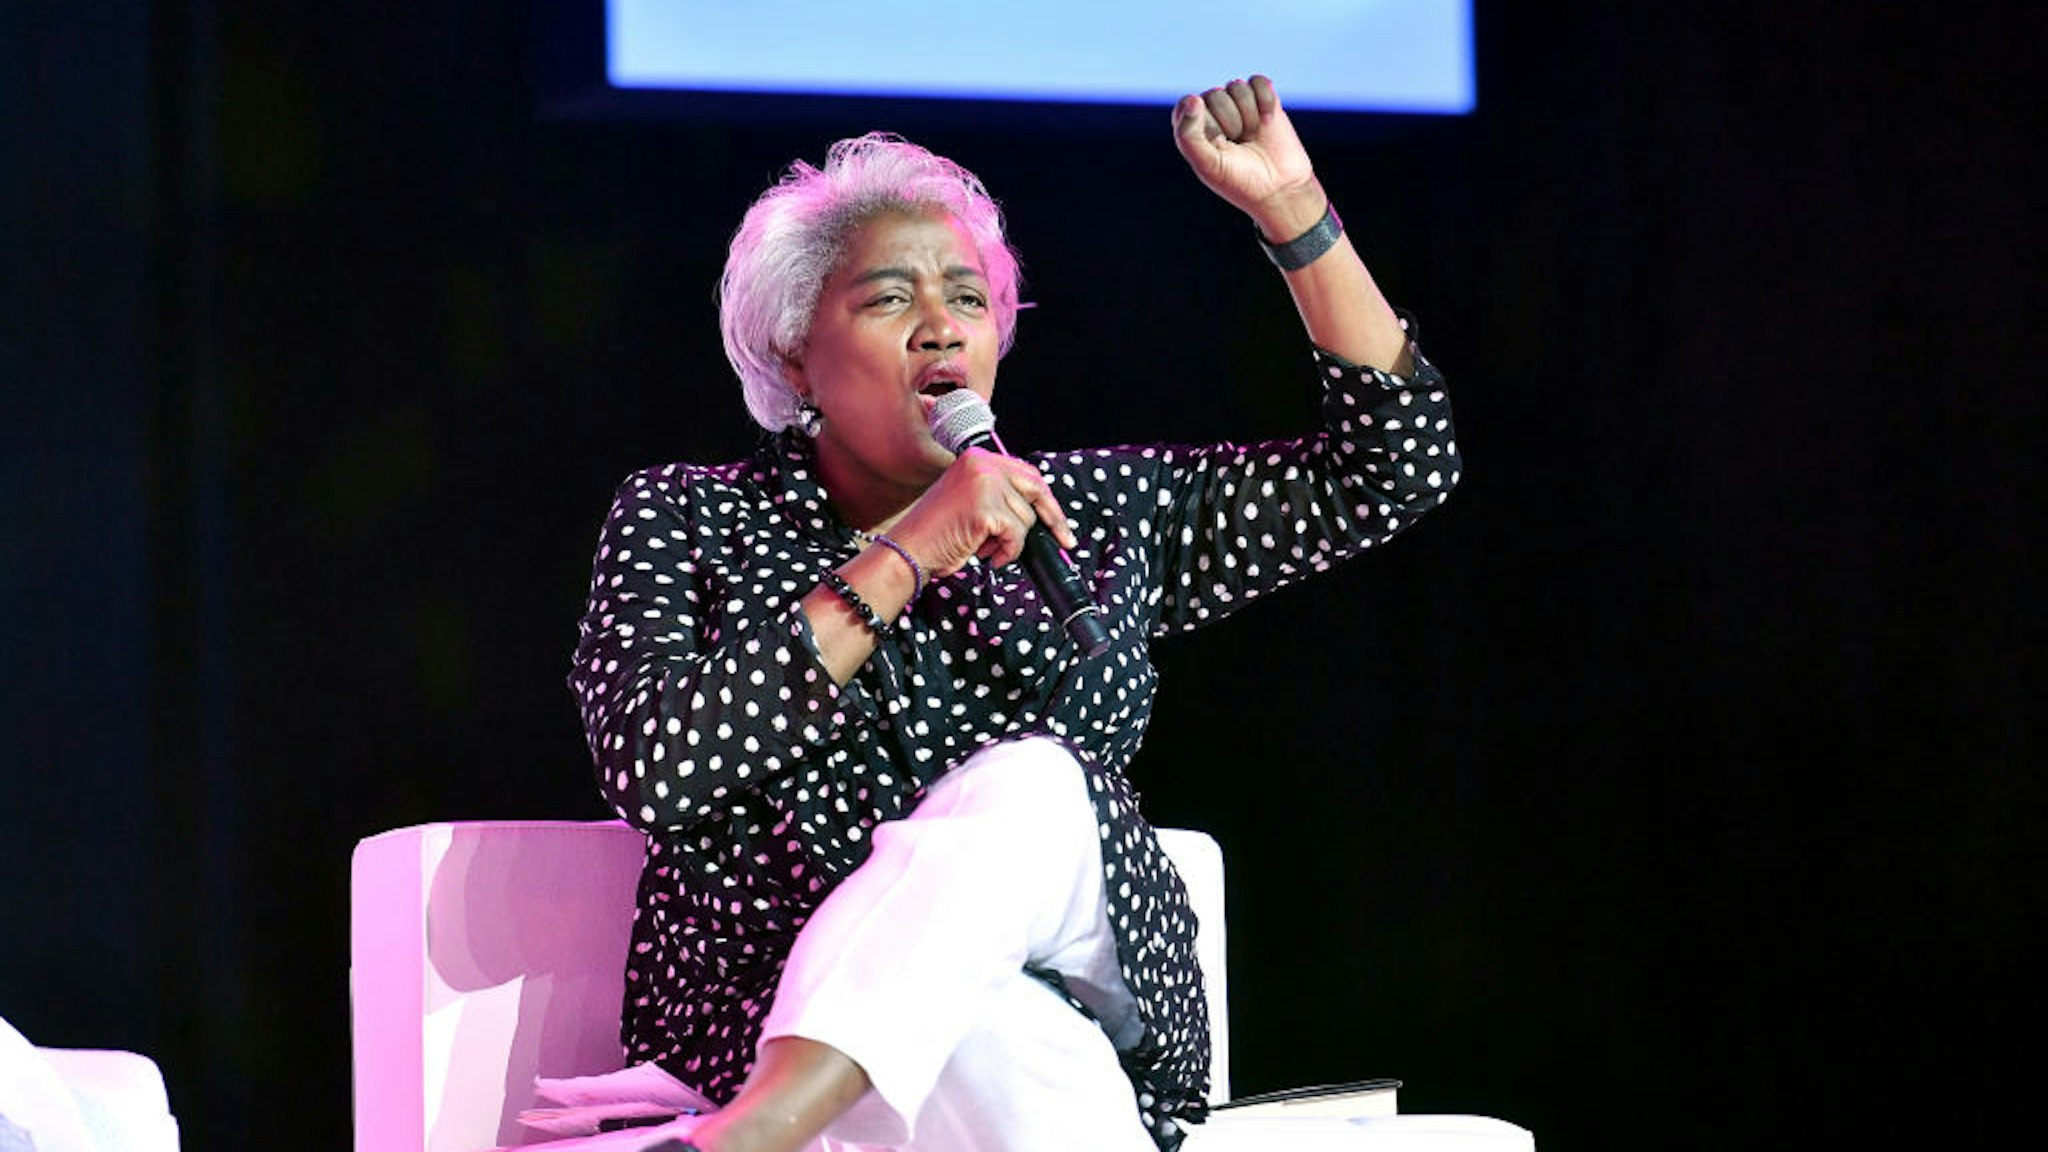 NEW ORLEANS, LOUISIANA - JULY 05: Donna Brazile speaks at 2019 ESSENCE Festival Presented By Coca-Cola at Ernest N. Morial Convention Center on July 05, 2019 in New Orleans, Louisiana.